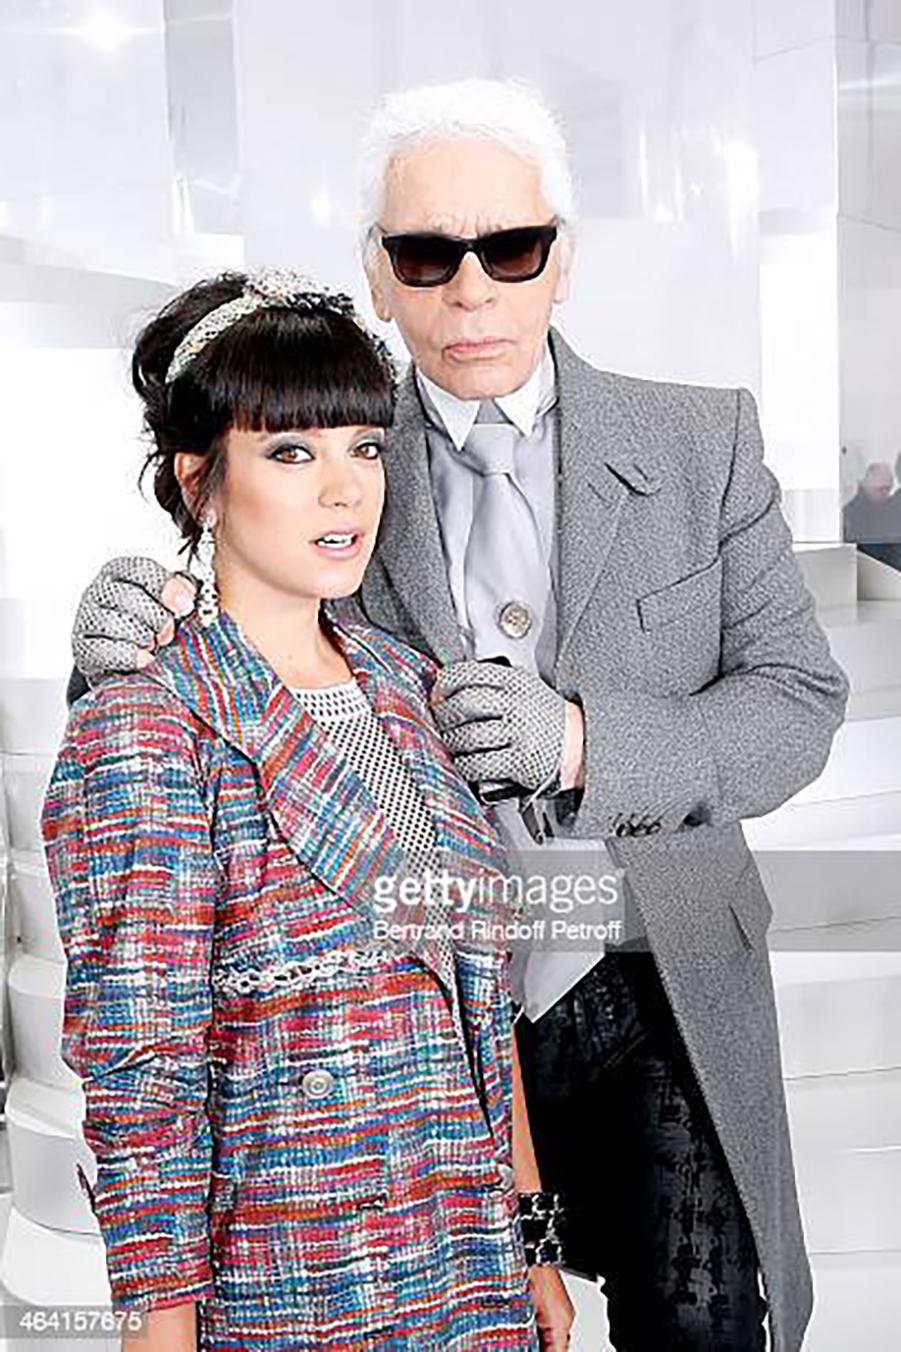 Famous Chanel trench coat as seen on Lilly Allen.
- CC logo silver-tone buttons at front and cuffs
- signature braided trim
Size mark 34 FR, comes as oversized.